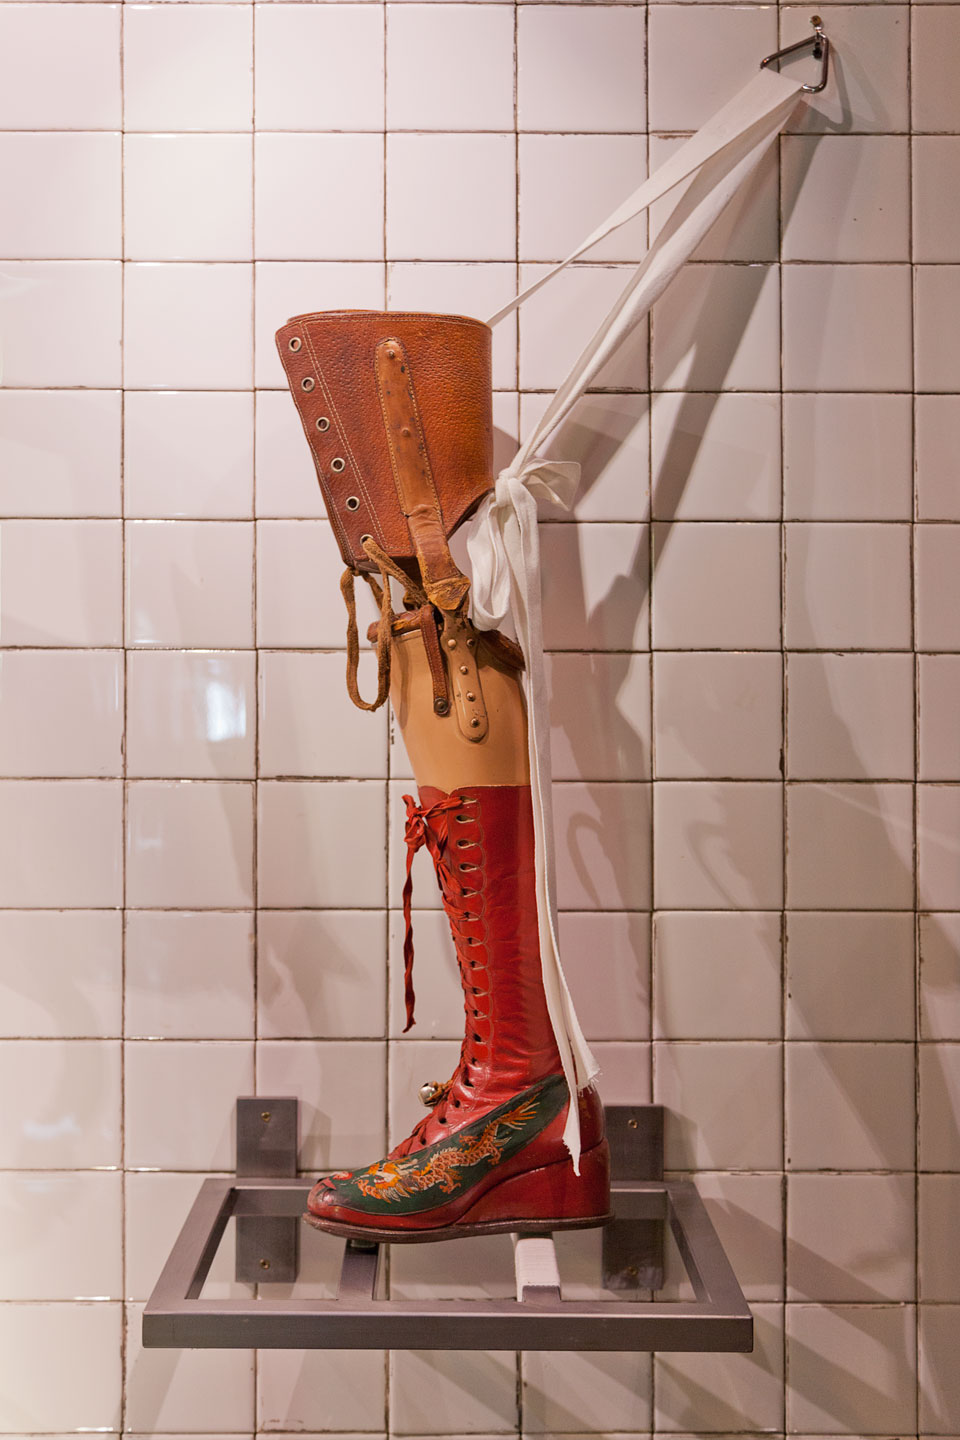 Freda Kahlo's prosthetic leg with Chinese boot